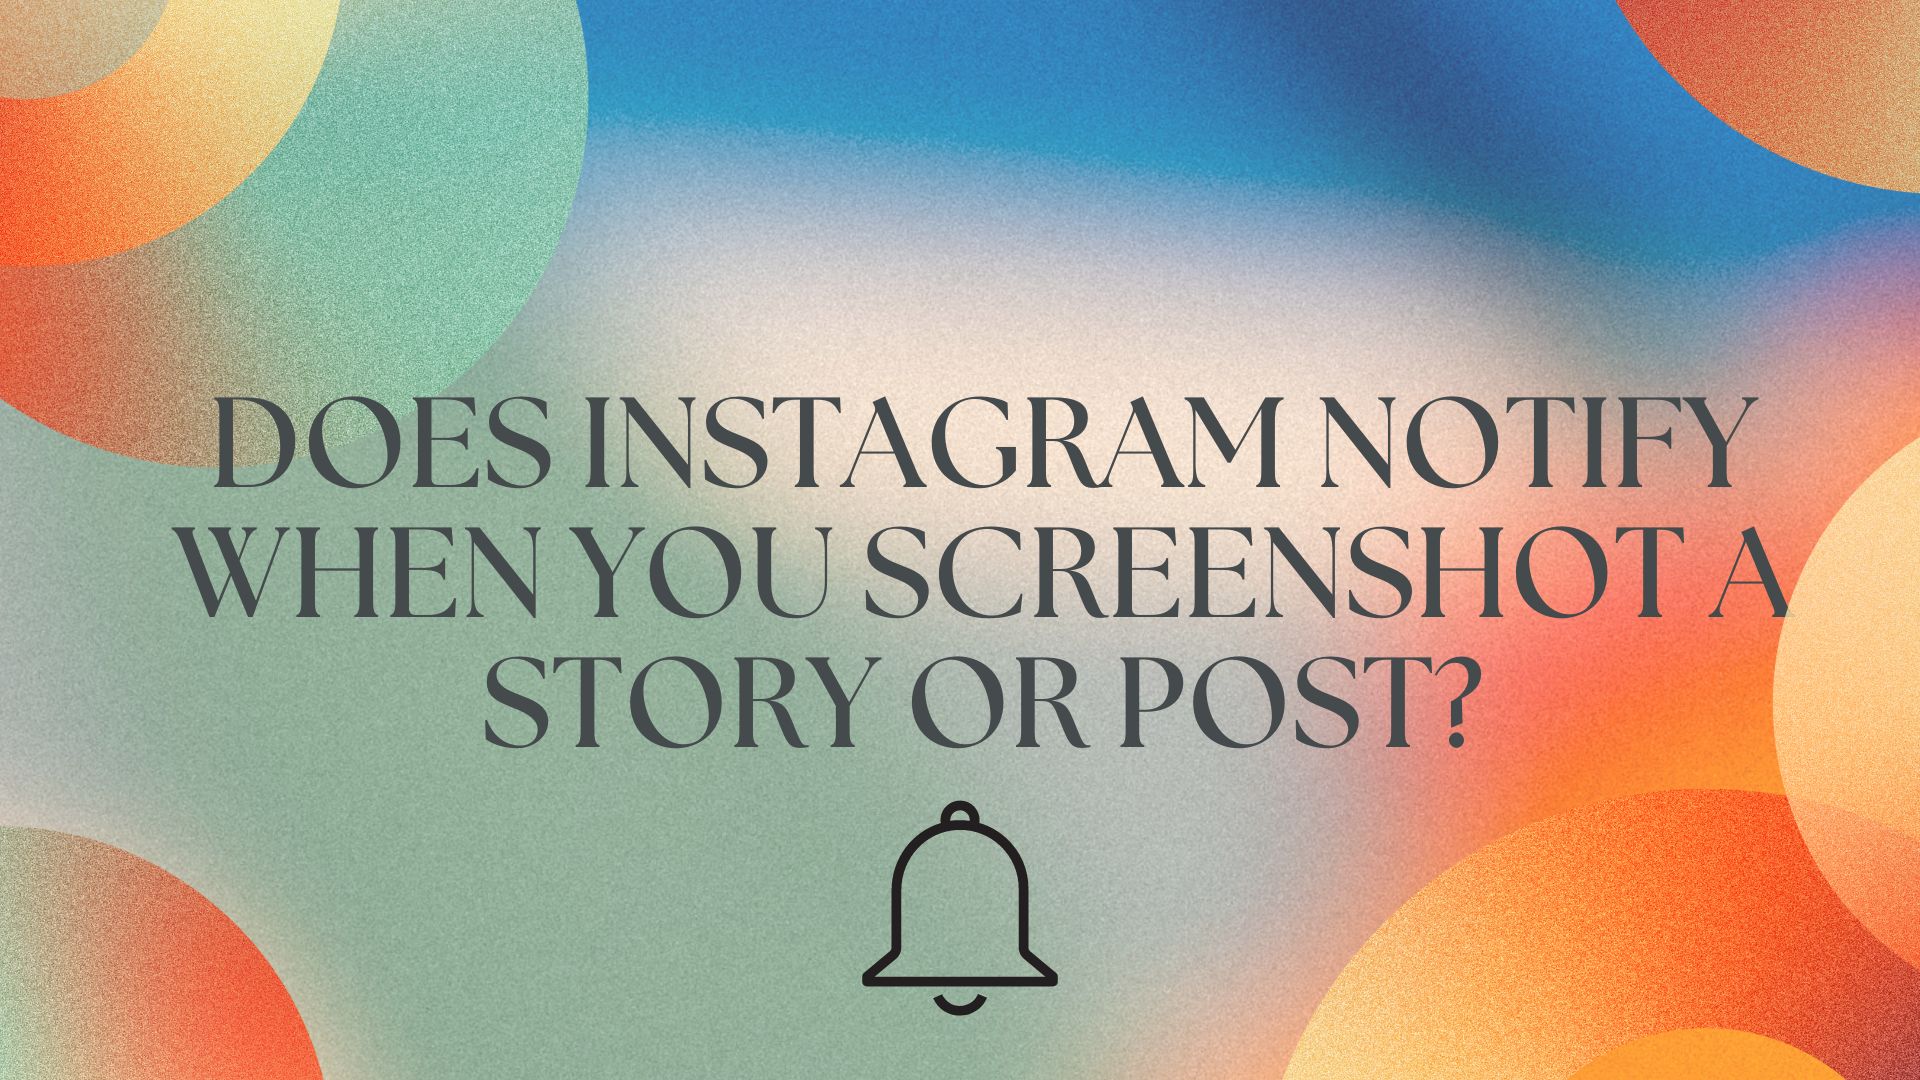 Does Instagram Notify When You Screenshot a Story or Post